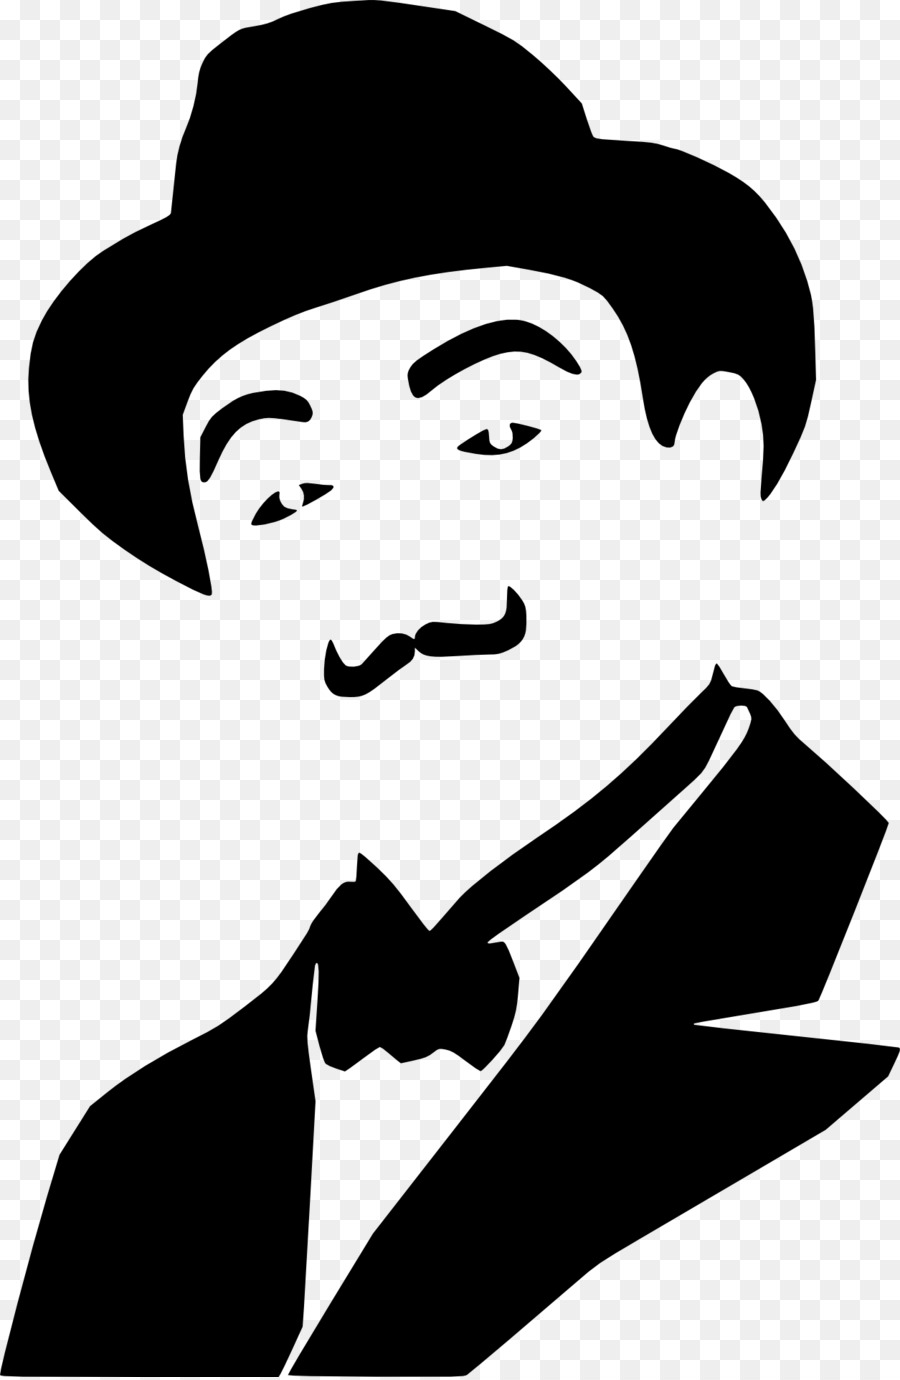 The Mysterious Affair at Styles Hercule Poirot Murder on the Orient Express The Disappearance of Mr. Davenheim Book - book png download - 1255*1920 - Free Transparent Mysterious Affair At Styles png Download.